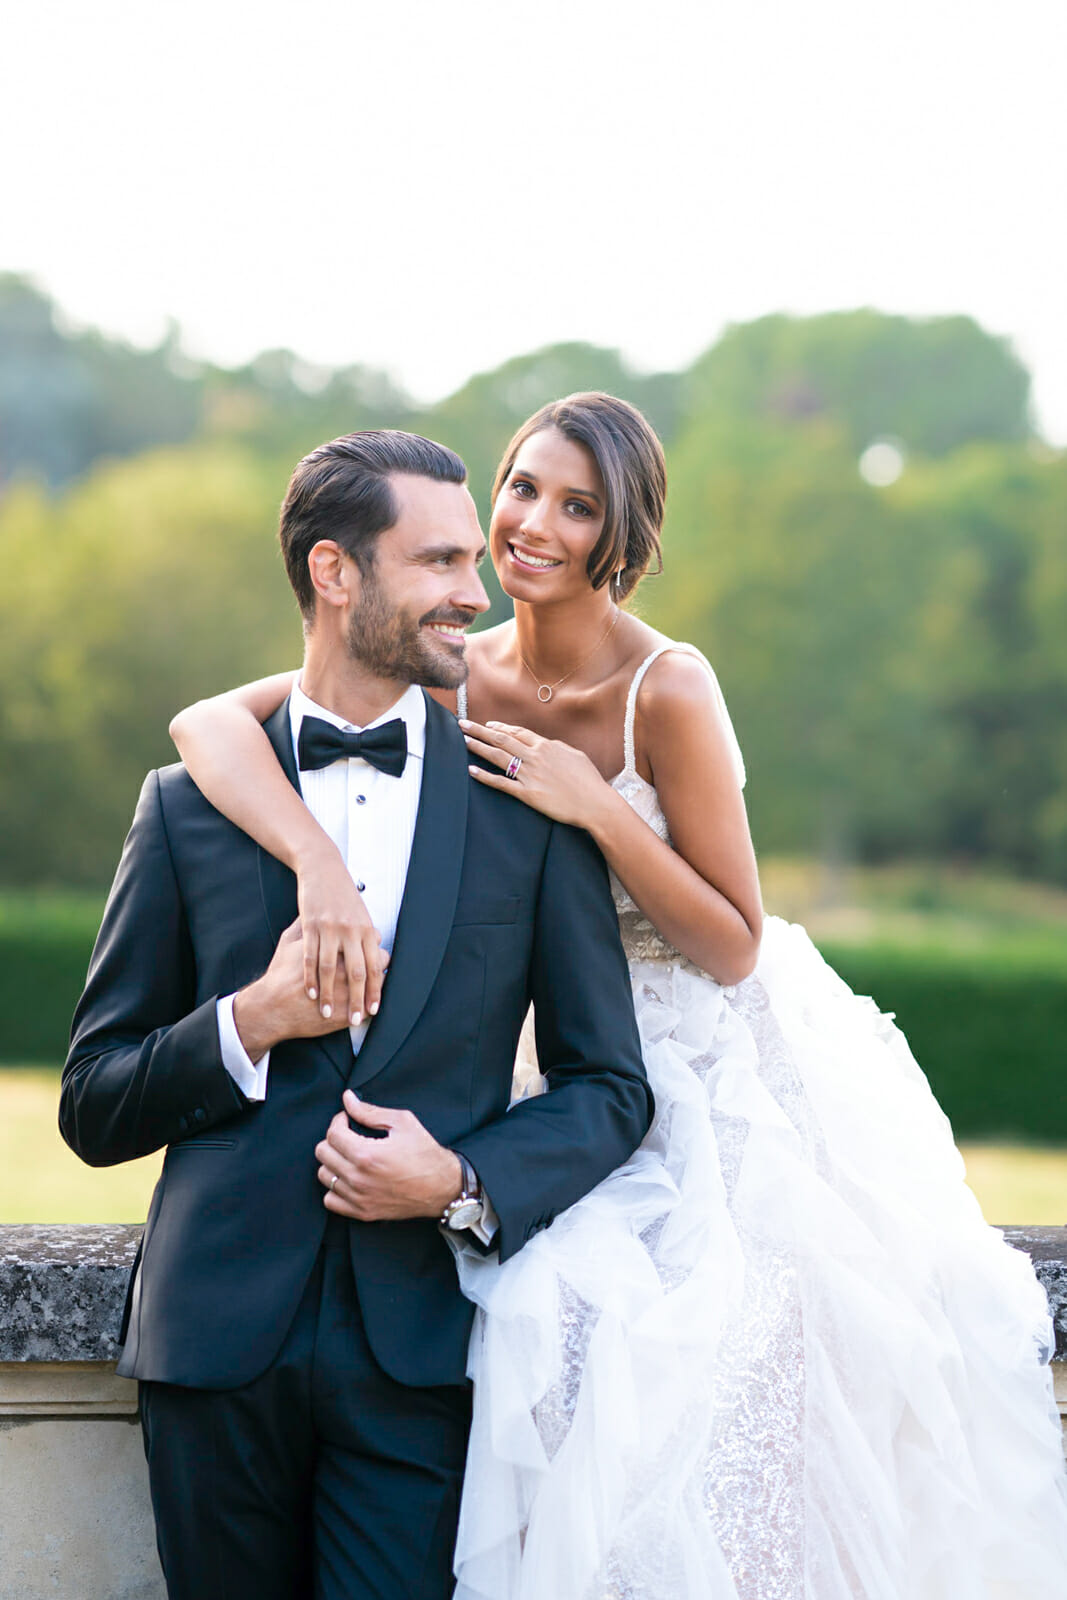 tips for eloping in paris
